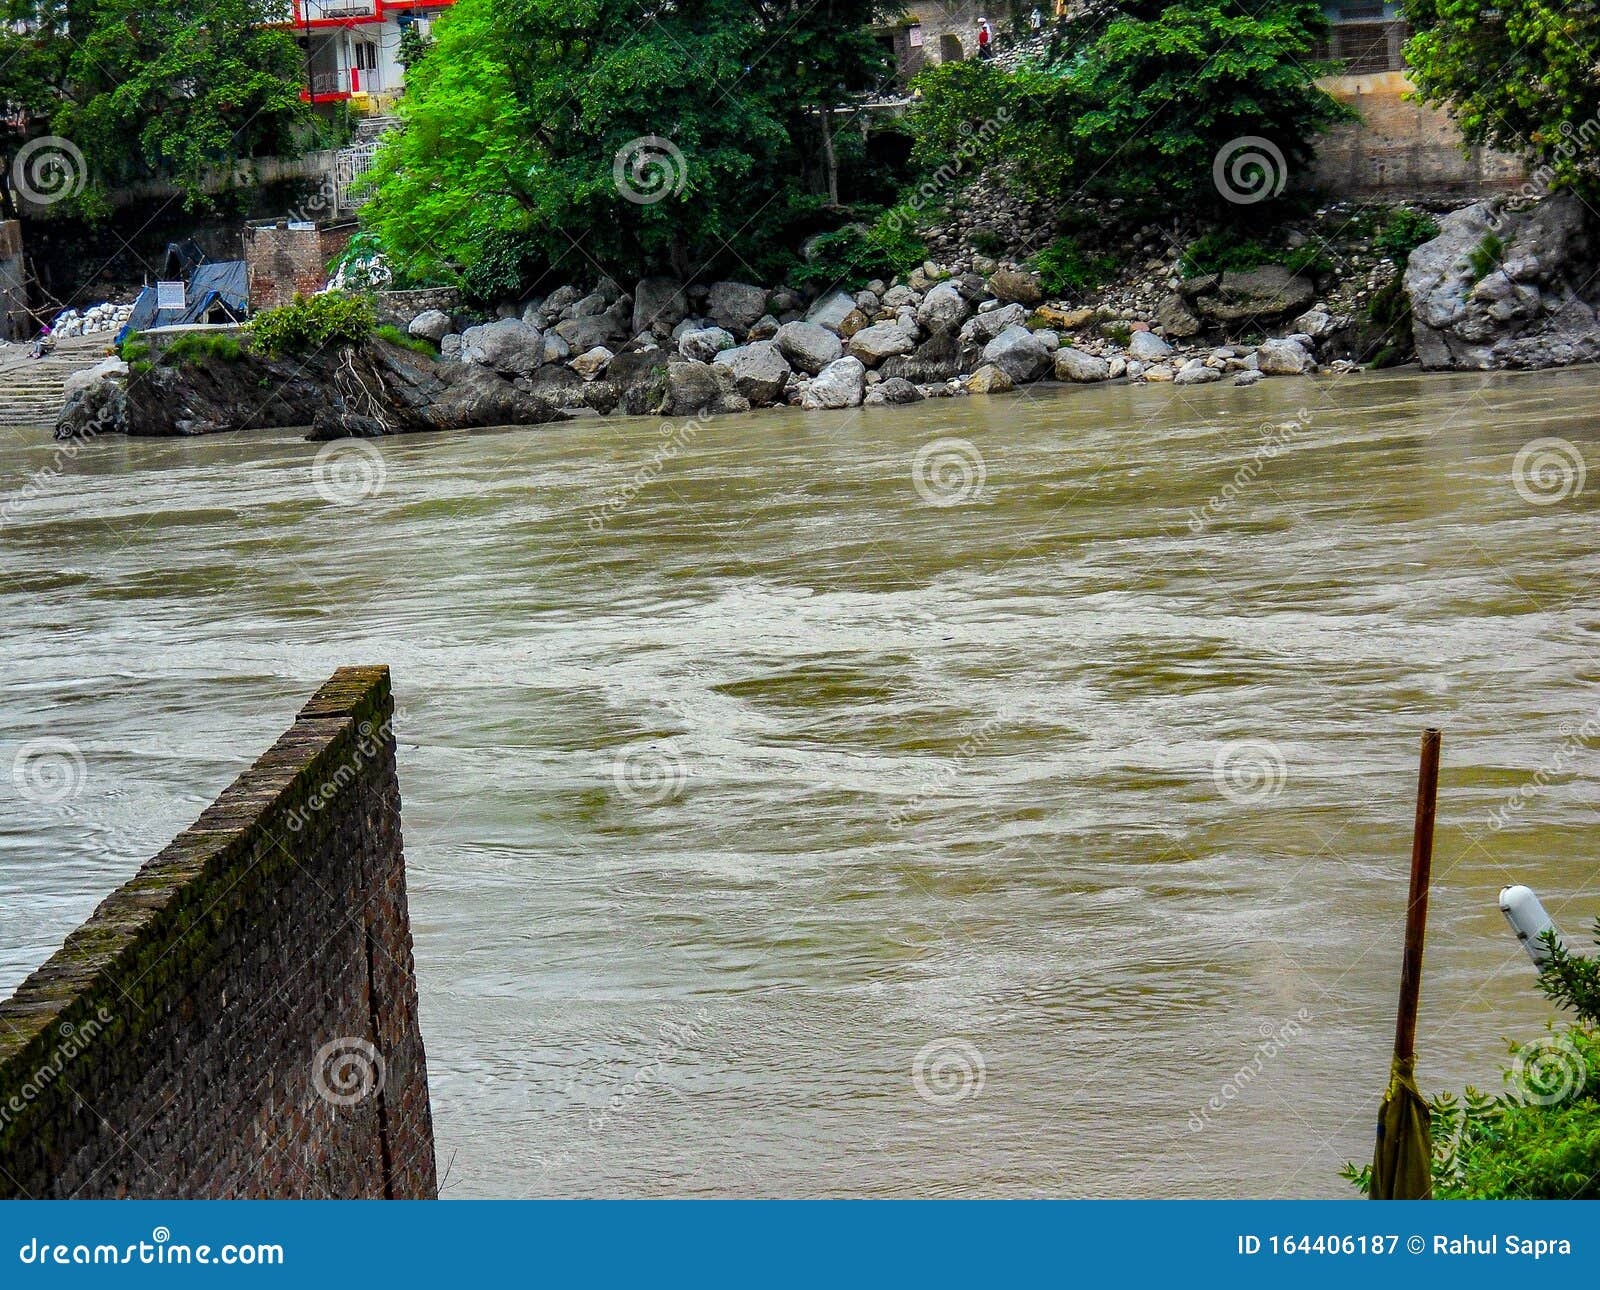 wide ganga river flowing having brown colour water in haridwar india